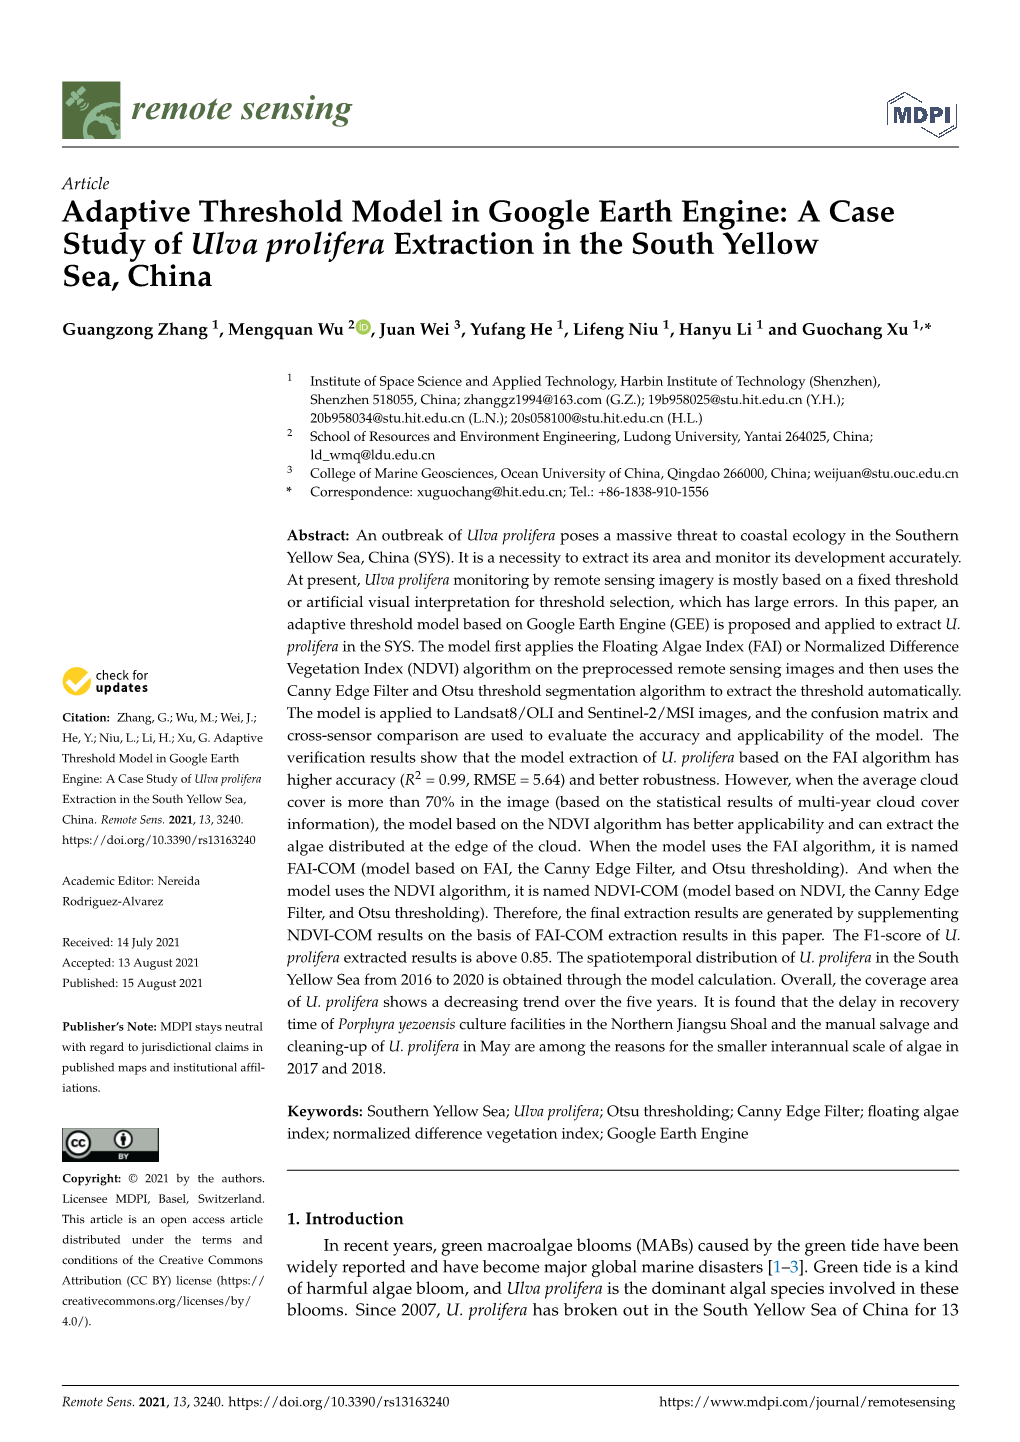 A Case Study of Ulva Prolifera Extraction in the South Yellow Sea, China